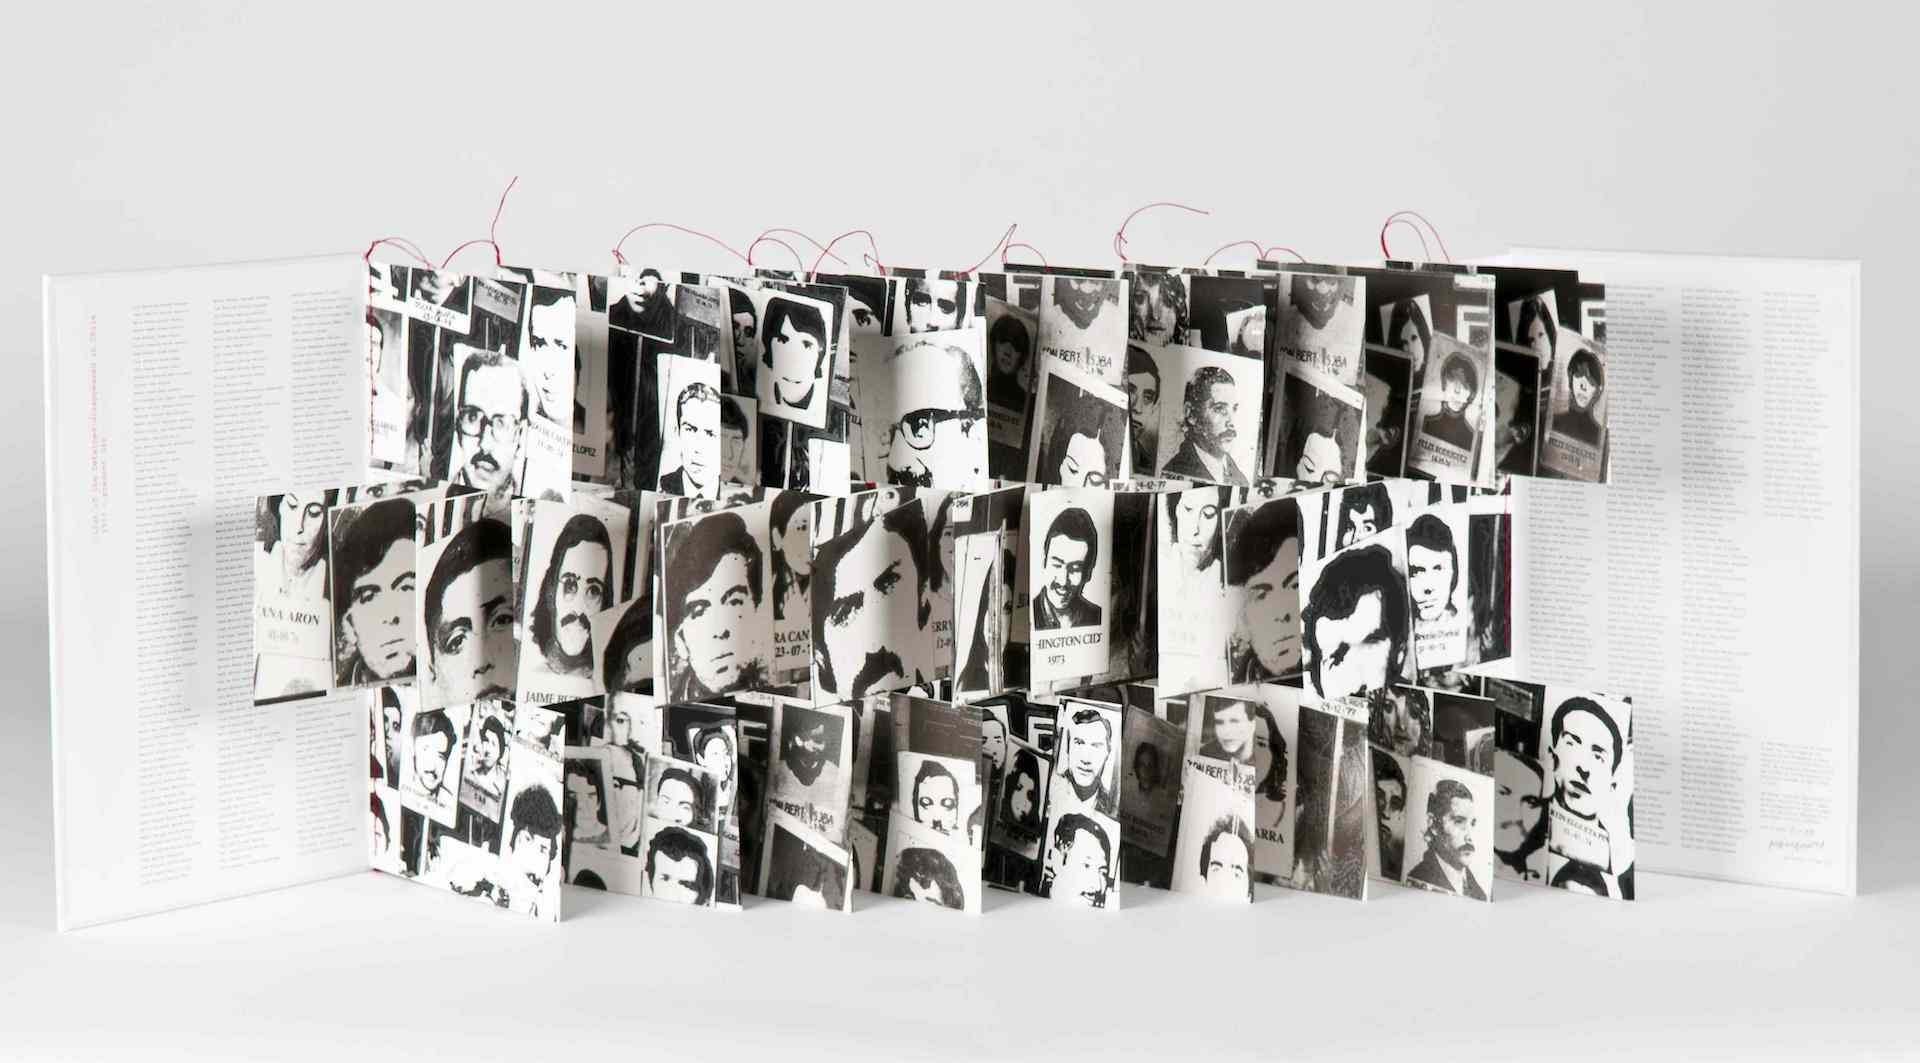 A pop-up print book full of black and white photos of disappeared victims of Chile's military dictatorship years. A part of San Martín's exhibition called "In Their Memory."